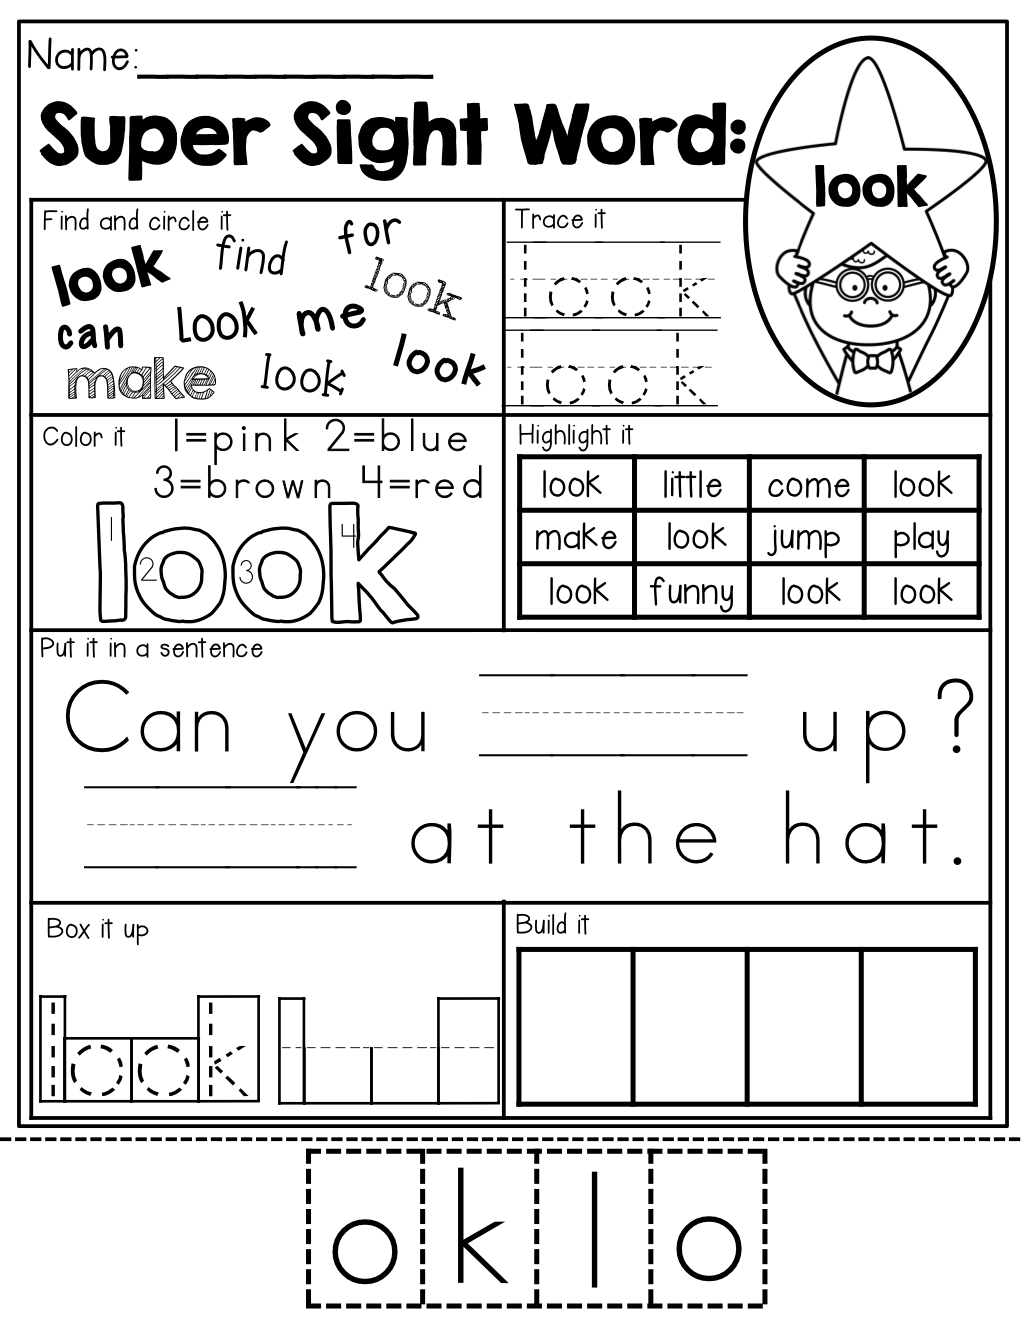 Printable Sight Word Coloring Pages - Coloring